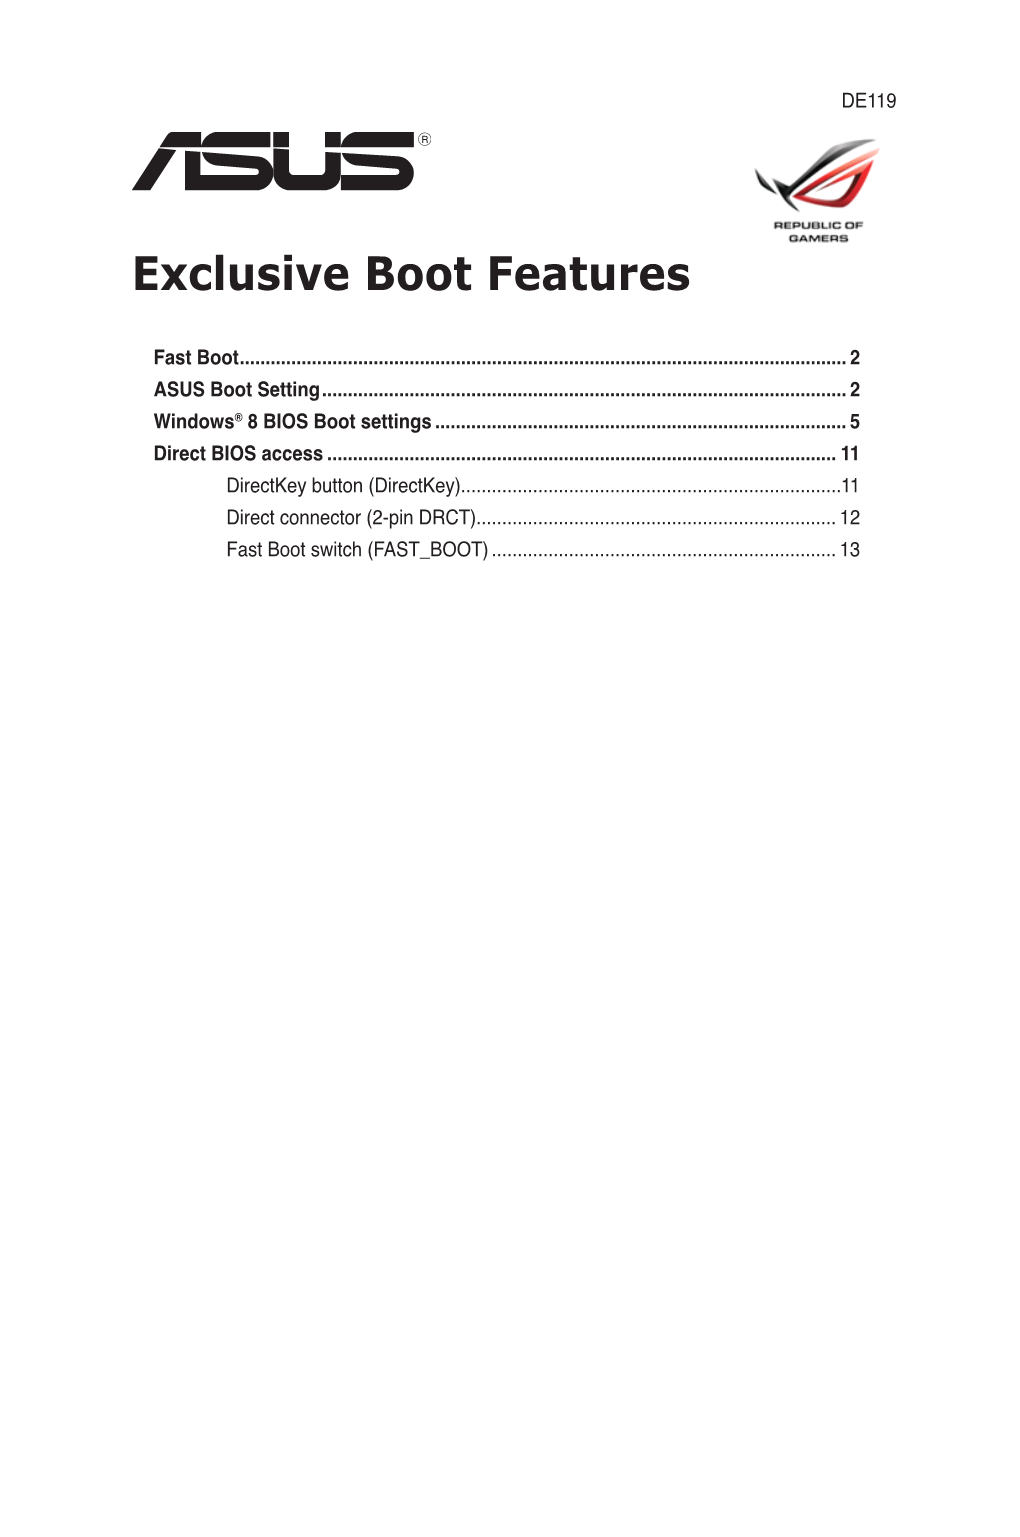 Exclusive Boot Features